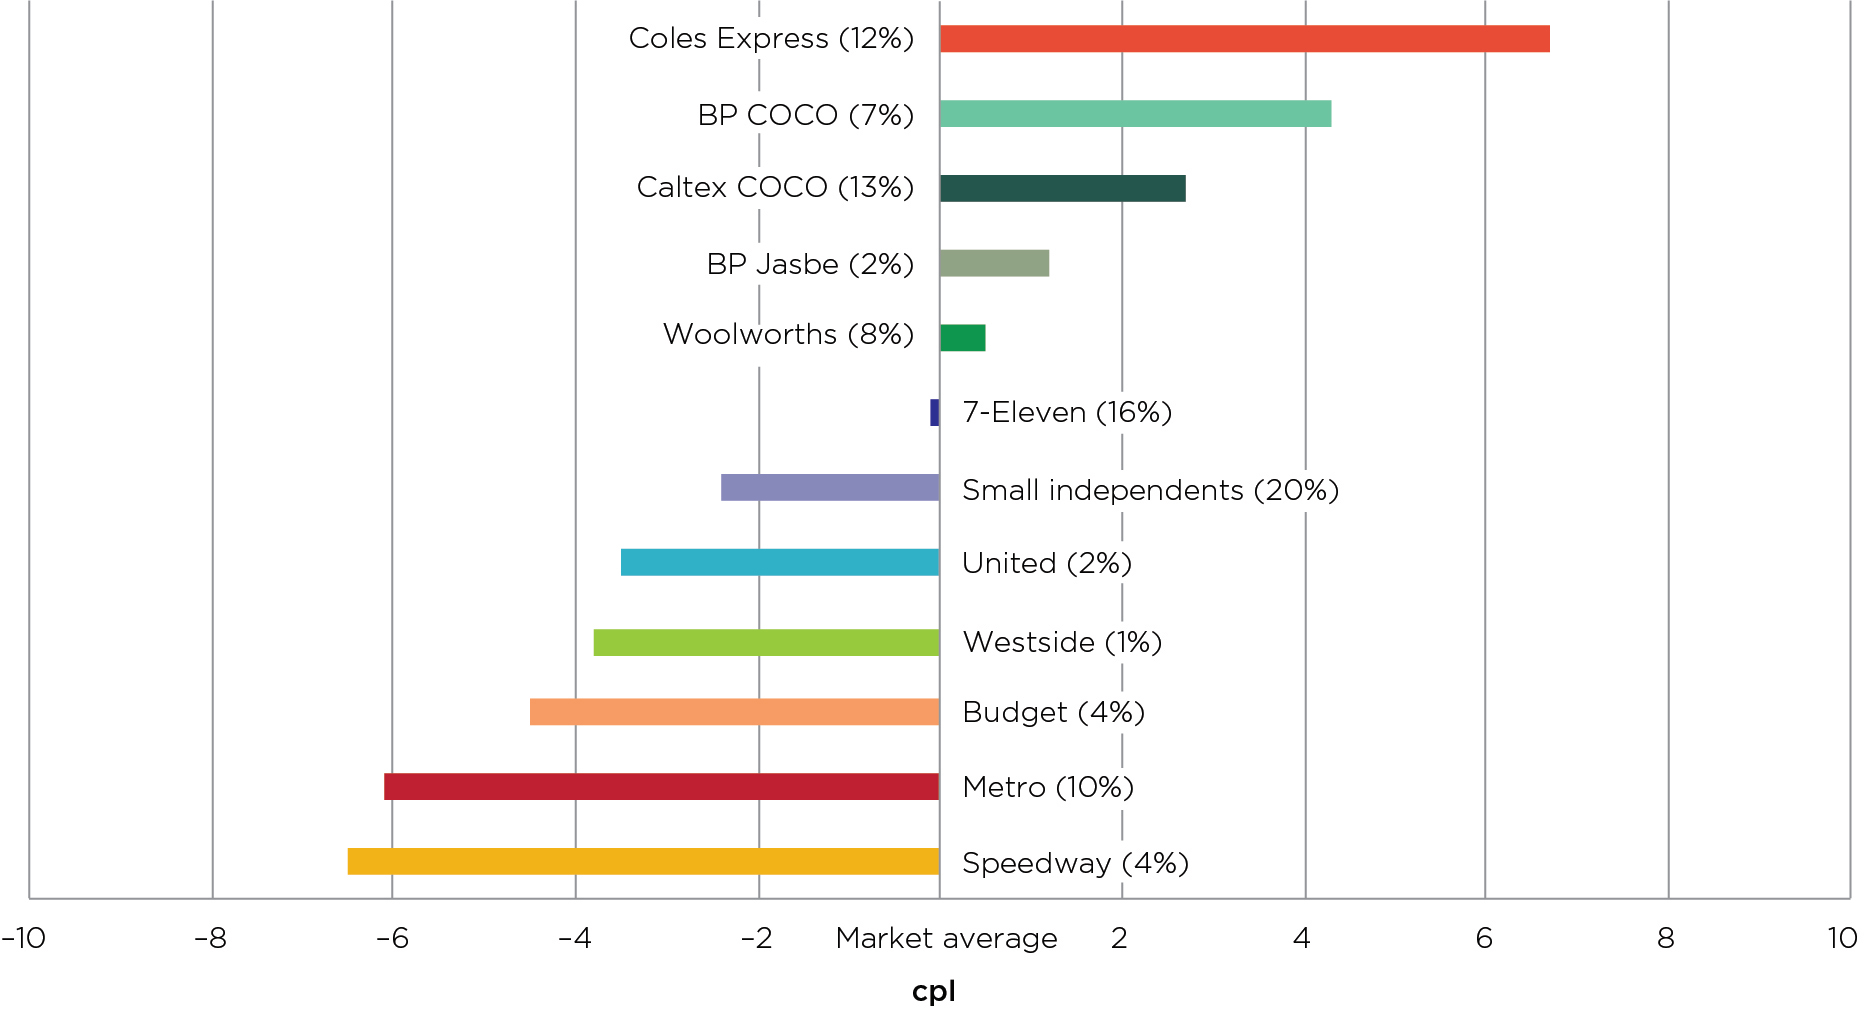 Difference between each major retailer’s annual average petrol price and the market annual average petrol price in Sydney in 2018